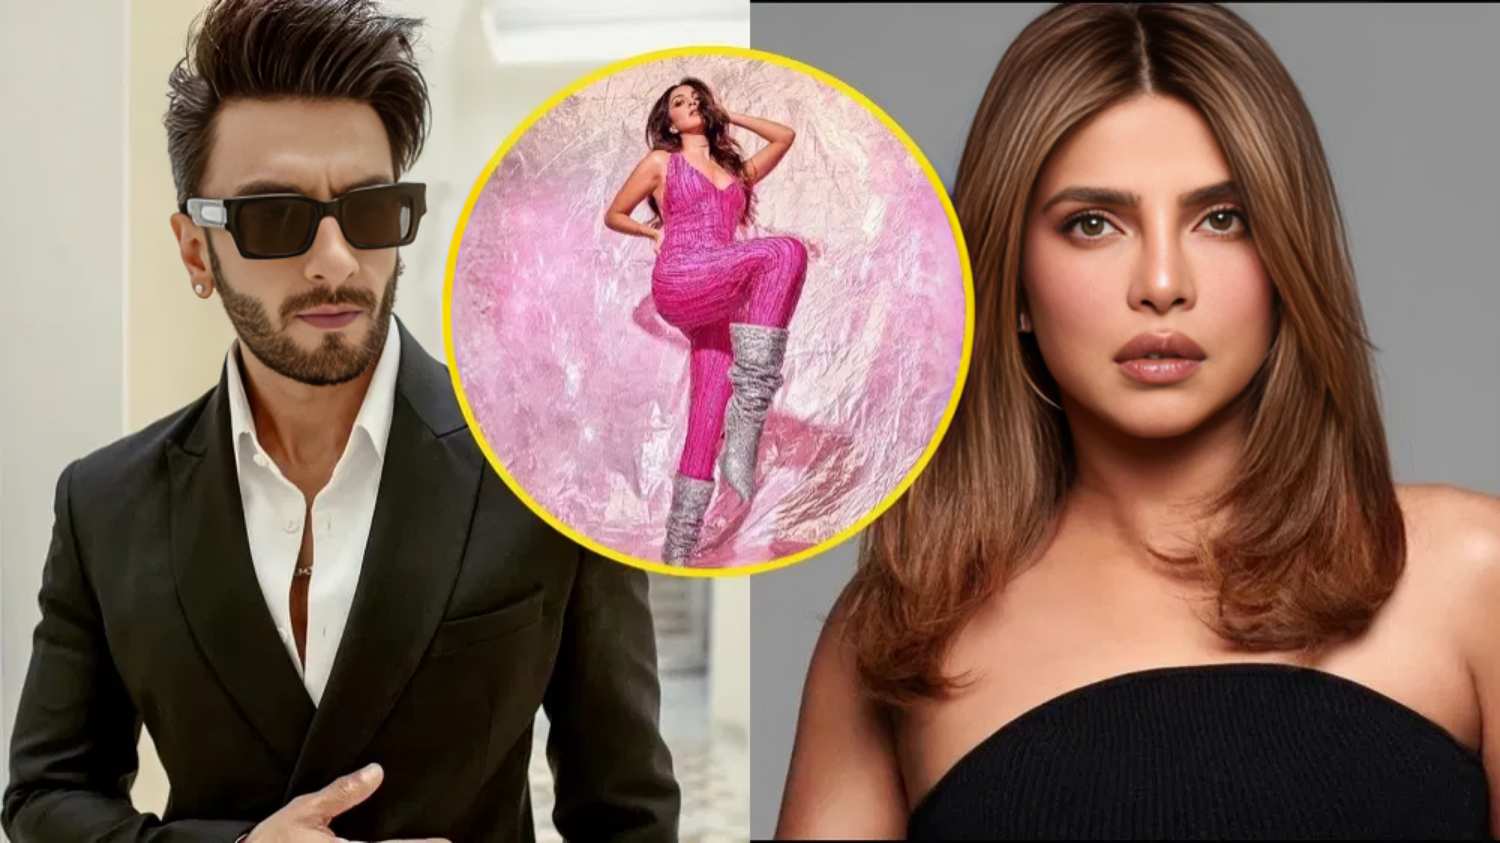 The actress will replace Priyanka Chopra in Ranveer Singh's 'Don 3', the name came out की तस्वीर